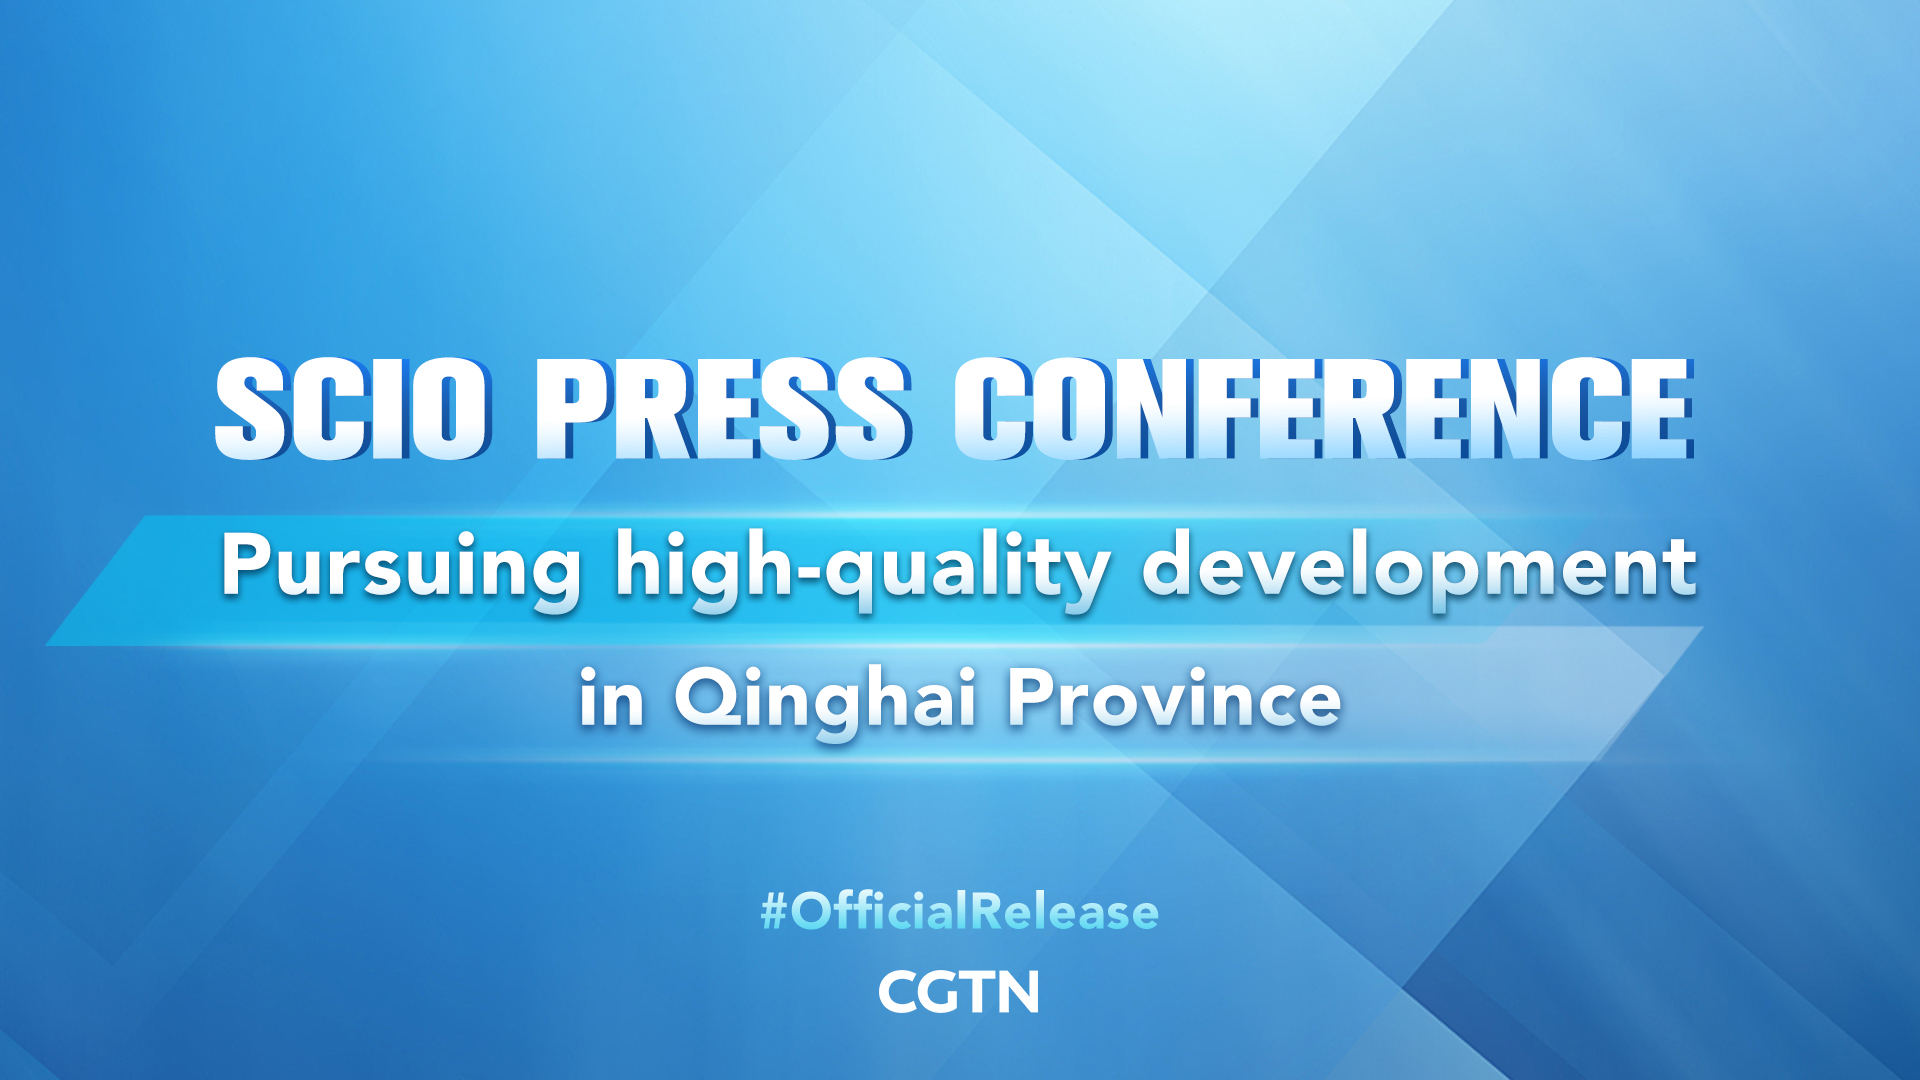 Live: China holds press conference on pursuing high-quality development in Qinghai Province